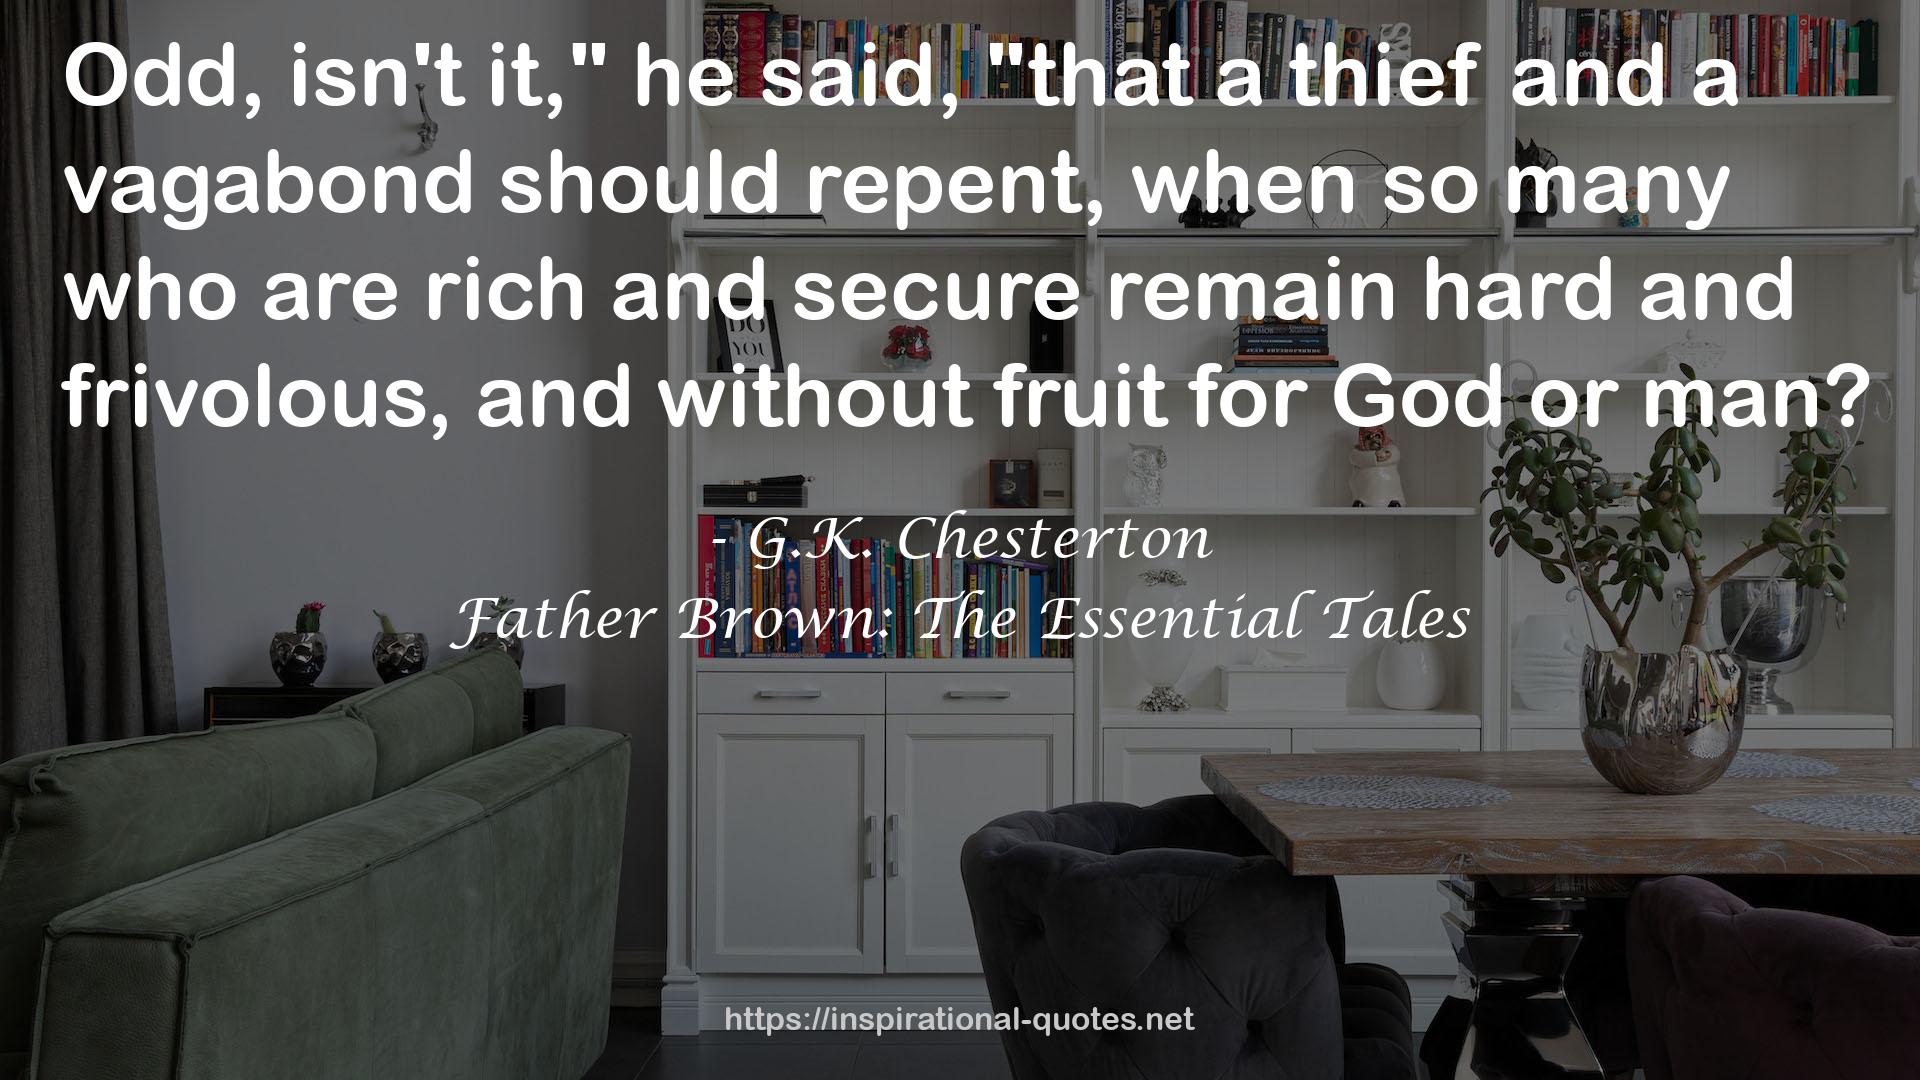 Father Brown: The Essential Tales QUOTES